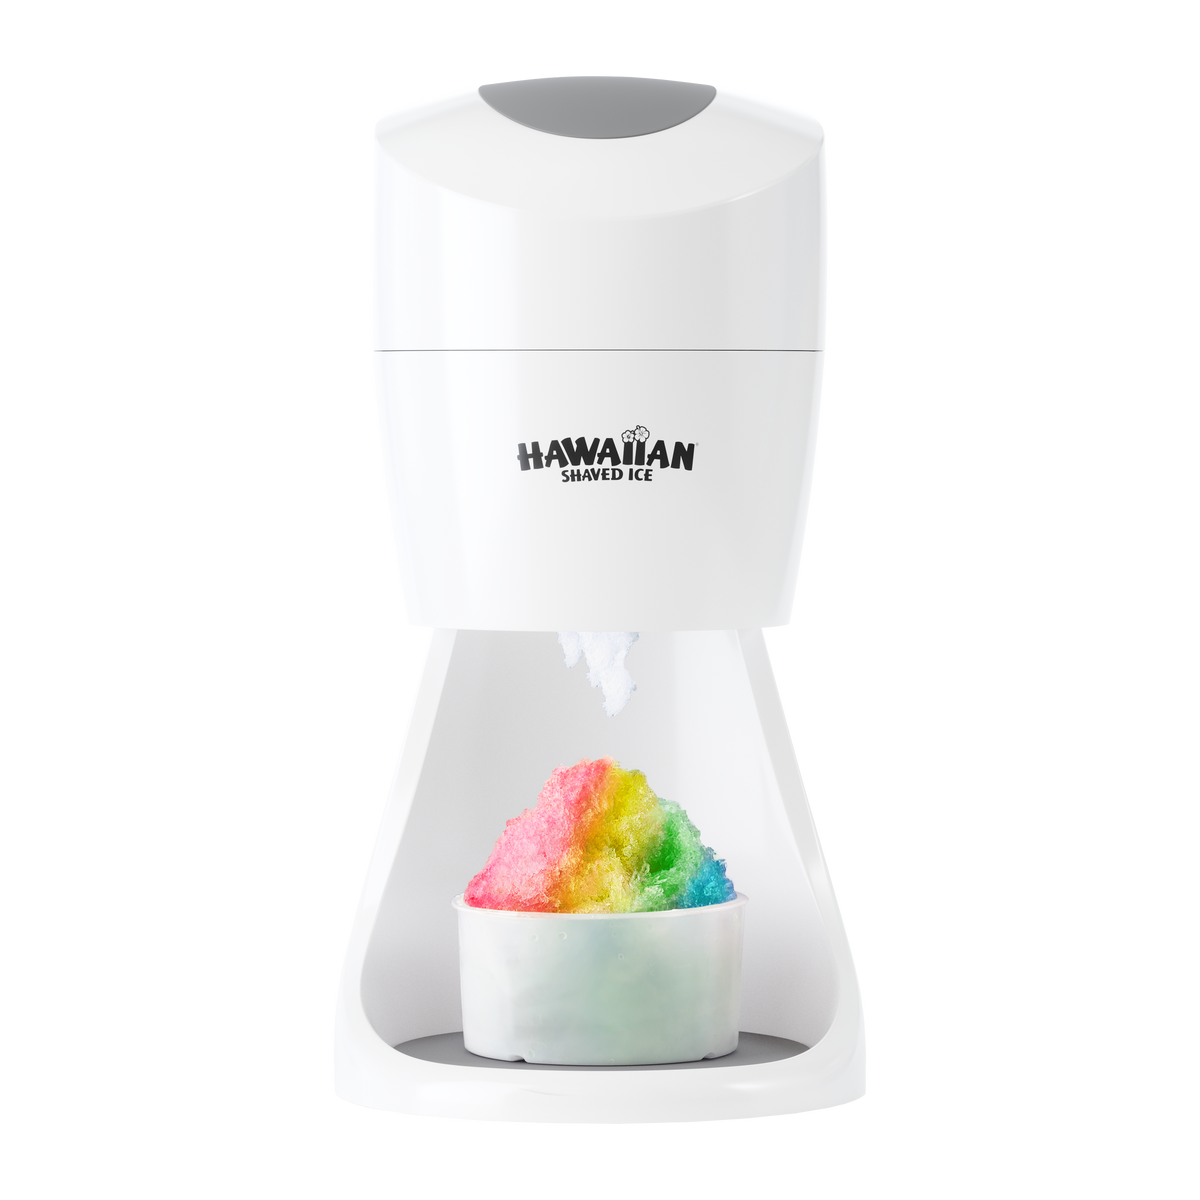 Essential Shaved Ice Machine Home Use S900a Hawaiian Shaved Ice®